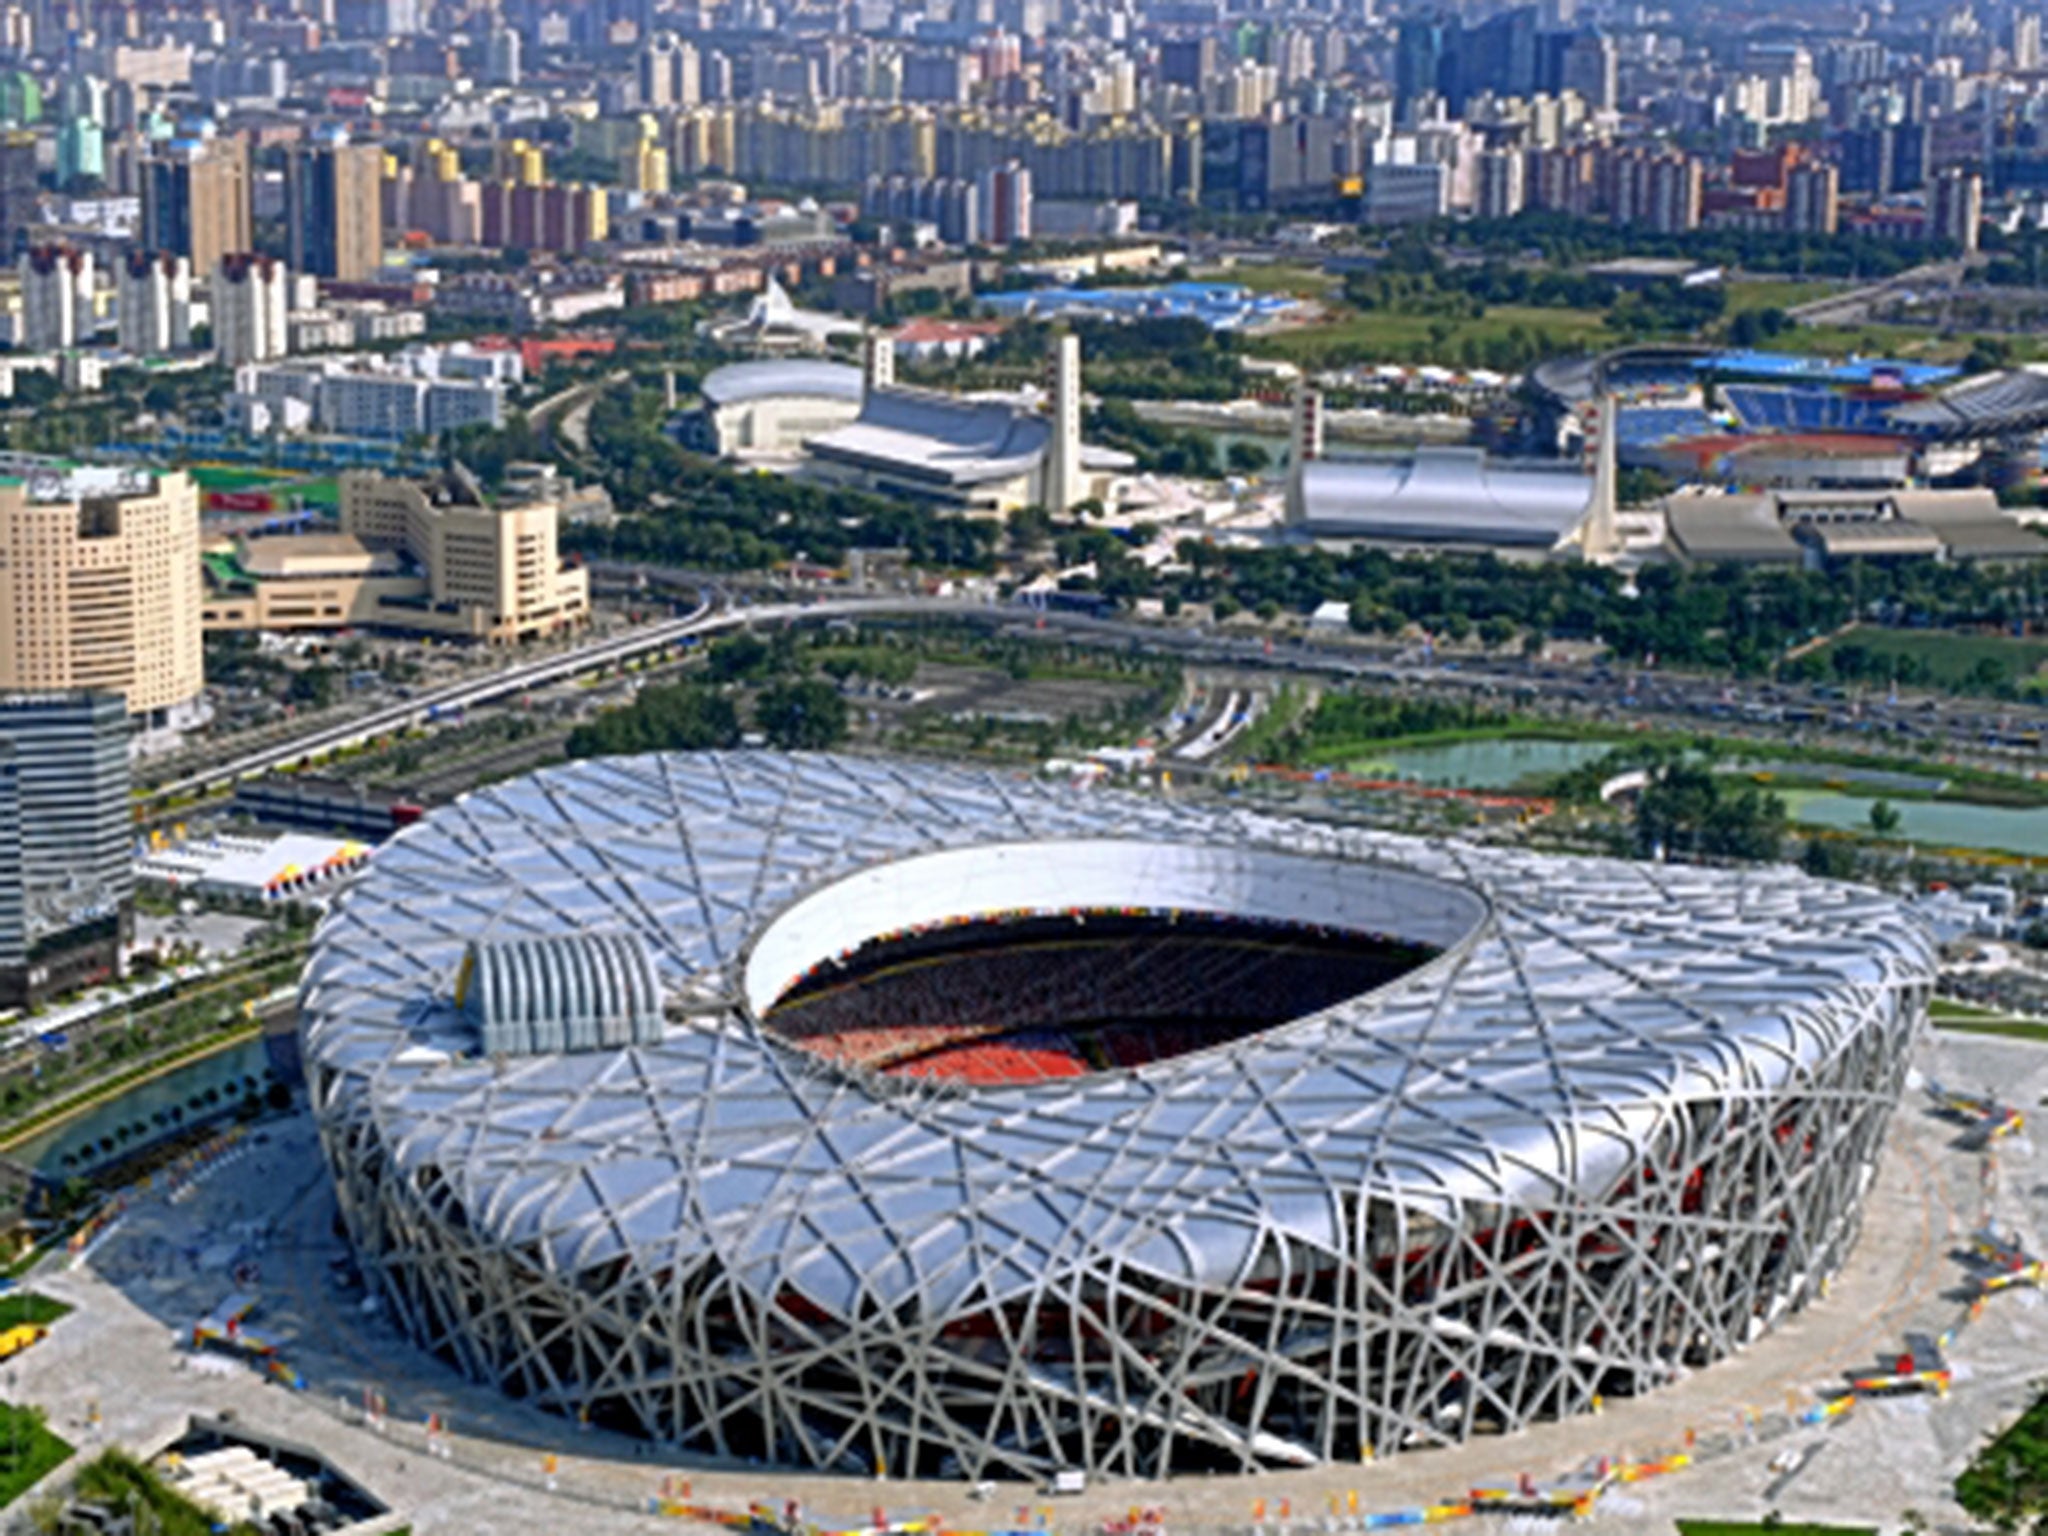 The Bird’s Nest stadium in Beijing could have the unusual honour of hosting the opening ceremony at both the summer and winter Olympics